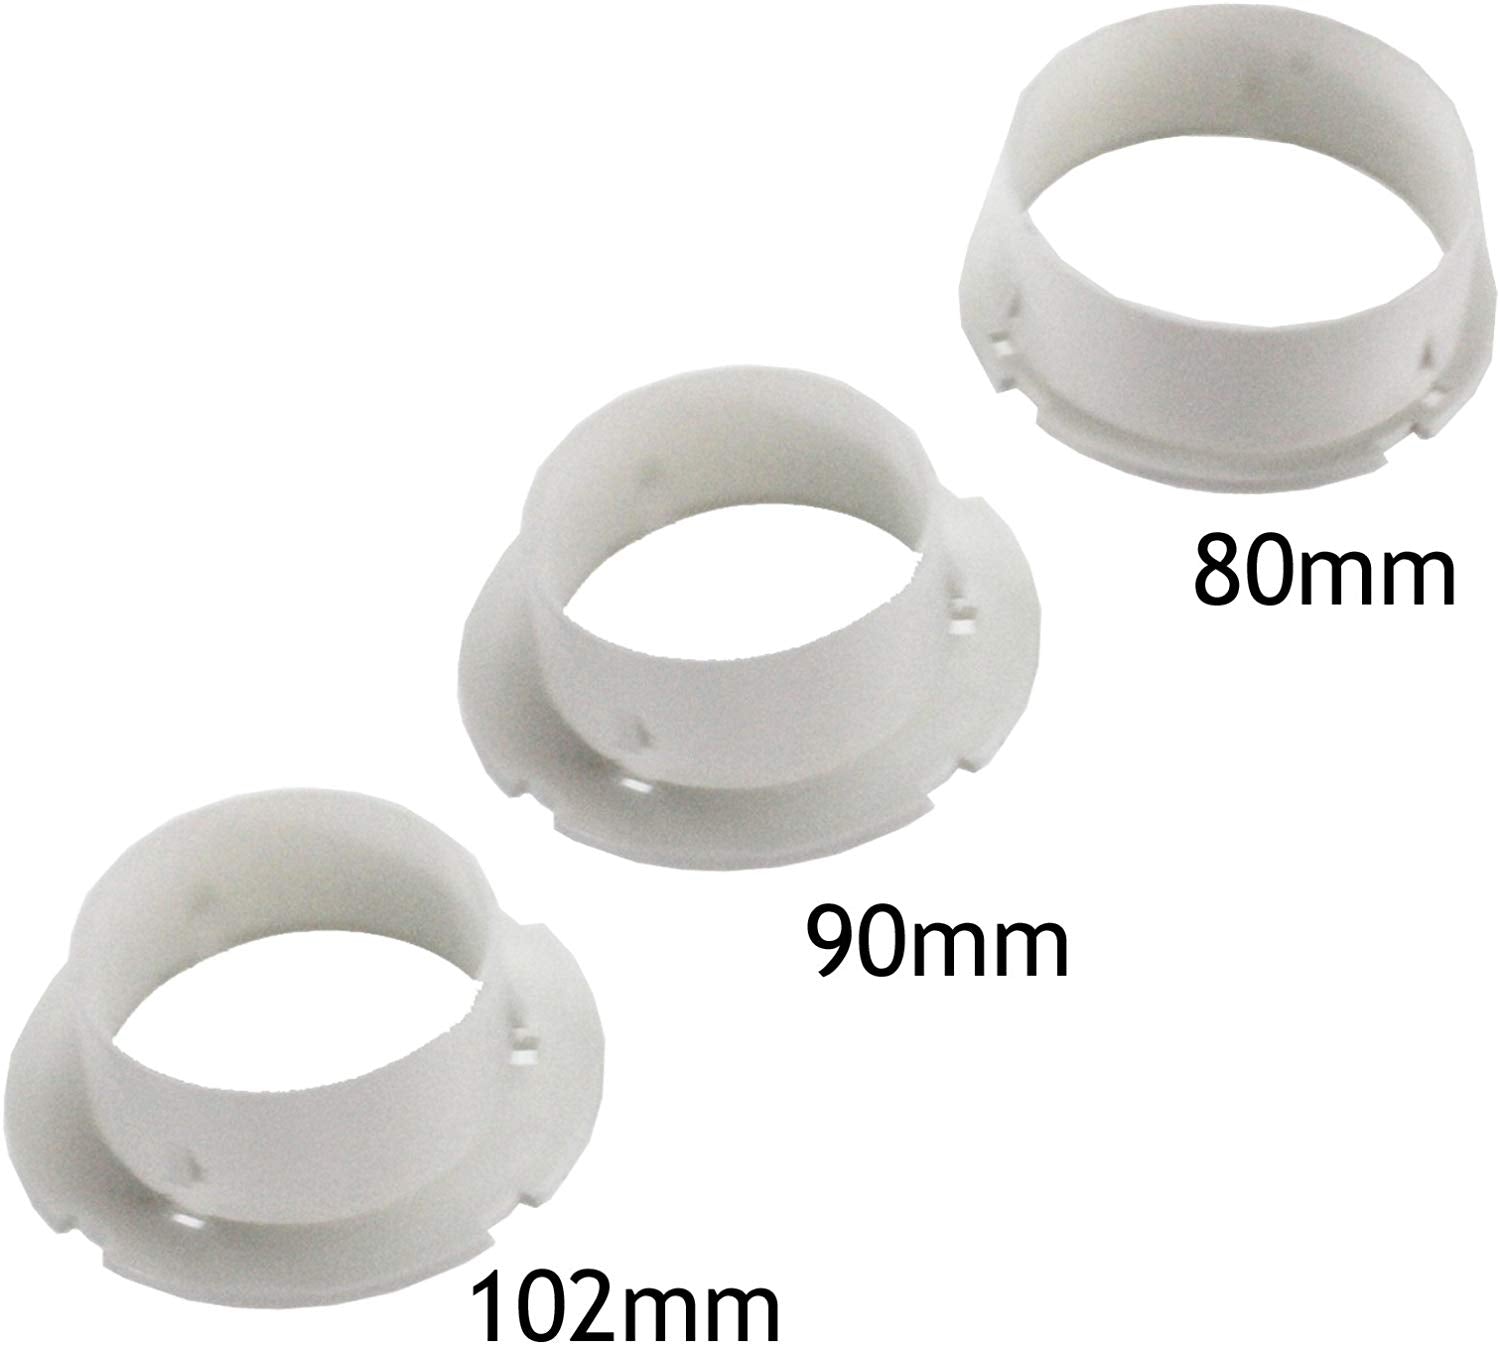 Vent Hose Condenser Kit with 3 x Adapters for John Lewis Tumble Dryer (1.2m)